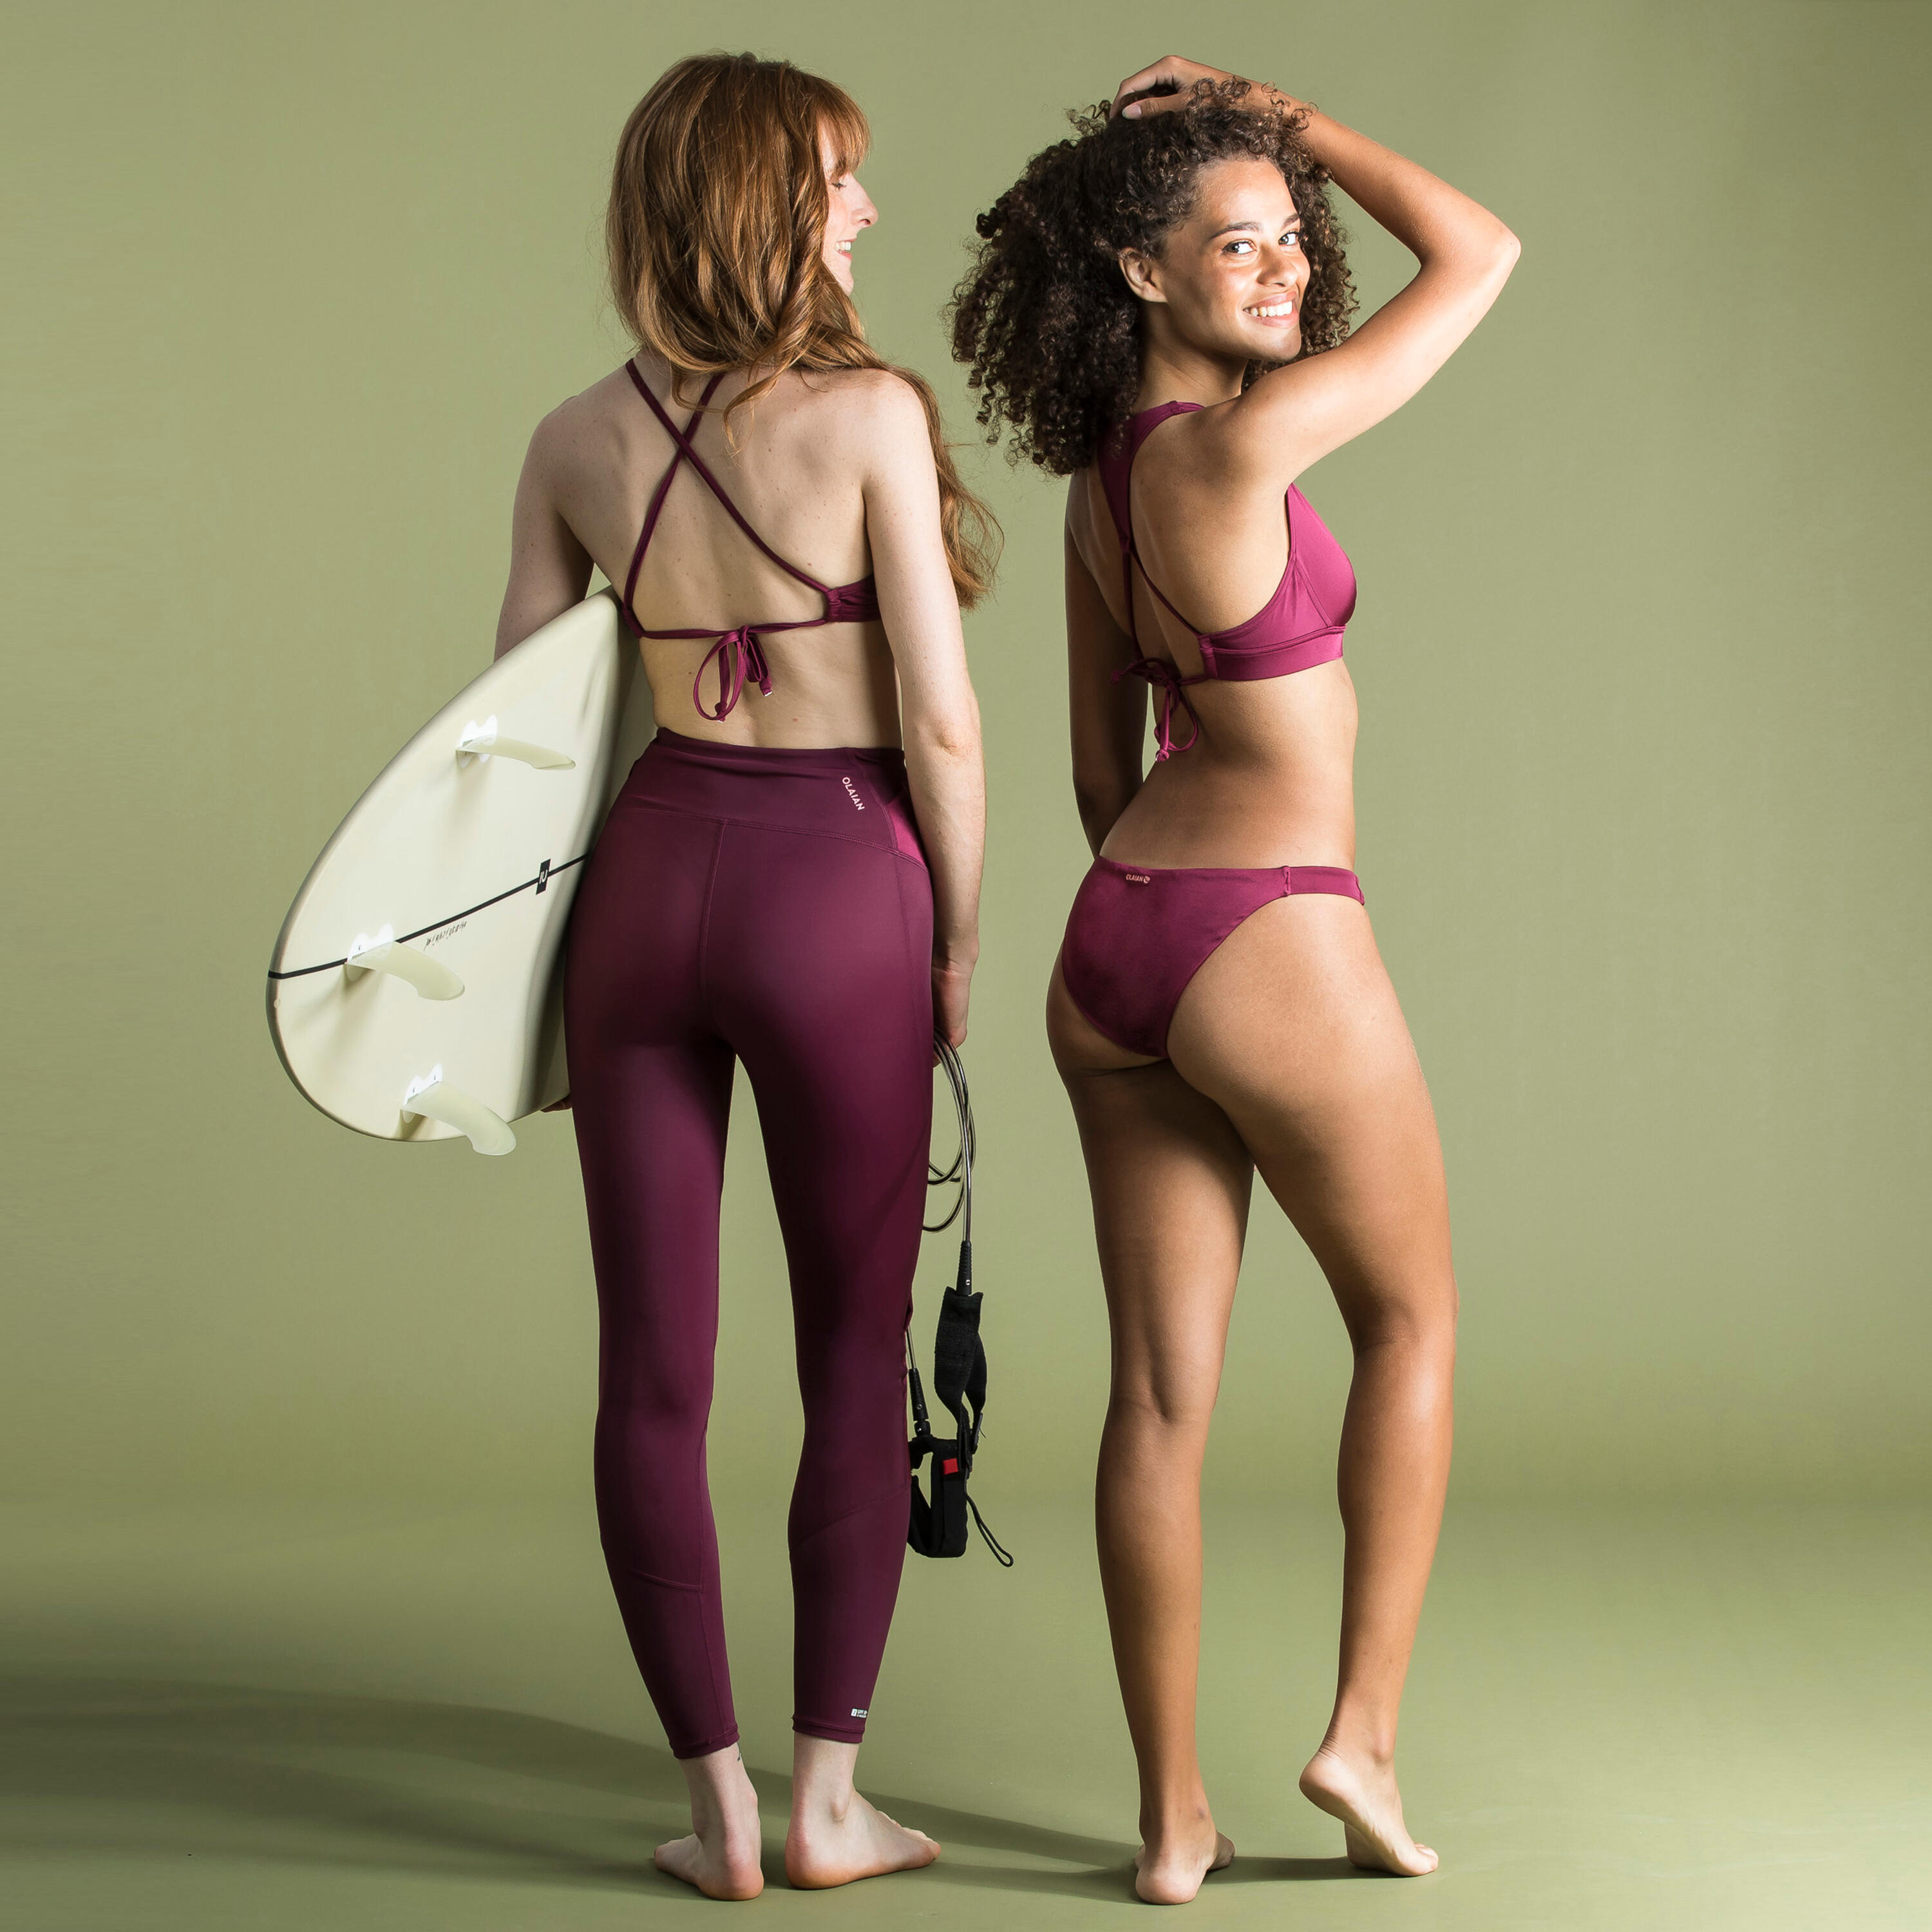 Women's Classic Swimsuit Bottoms with Thin Edges ALY - BURGUNDY 8/9